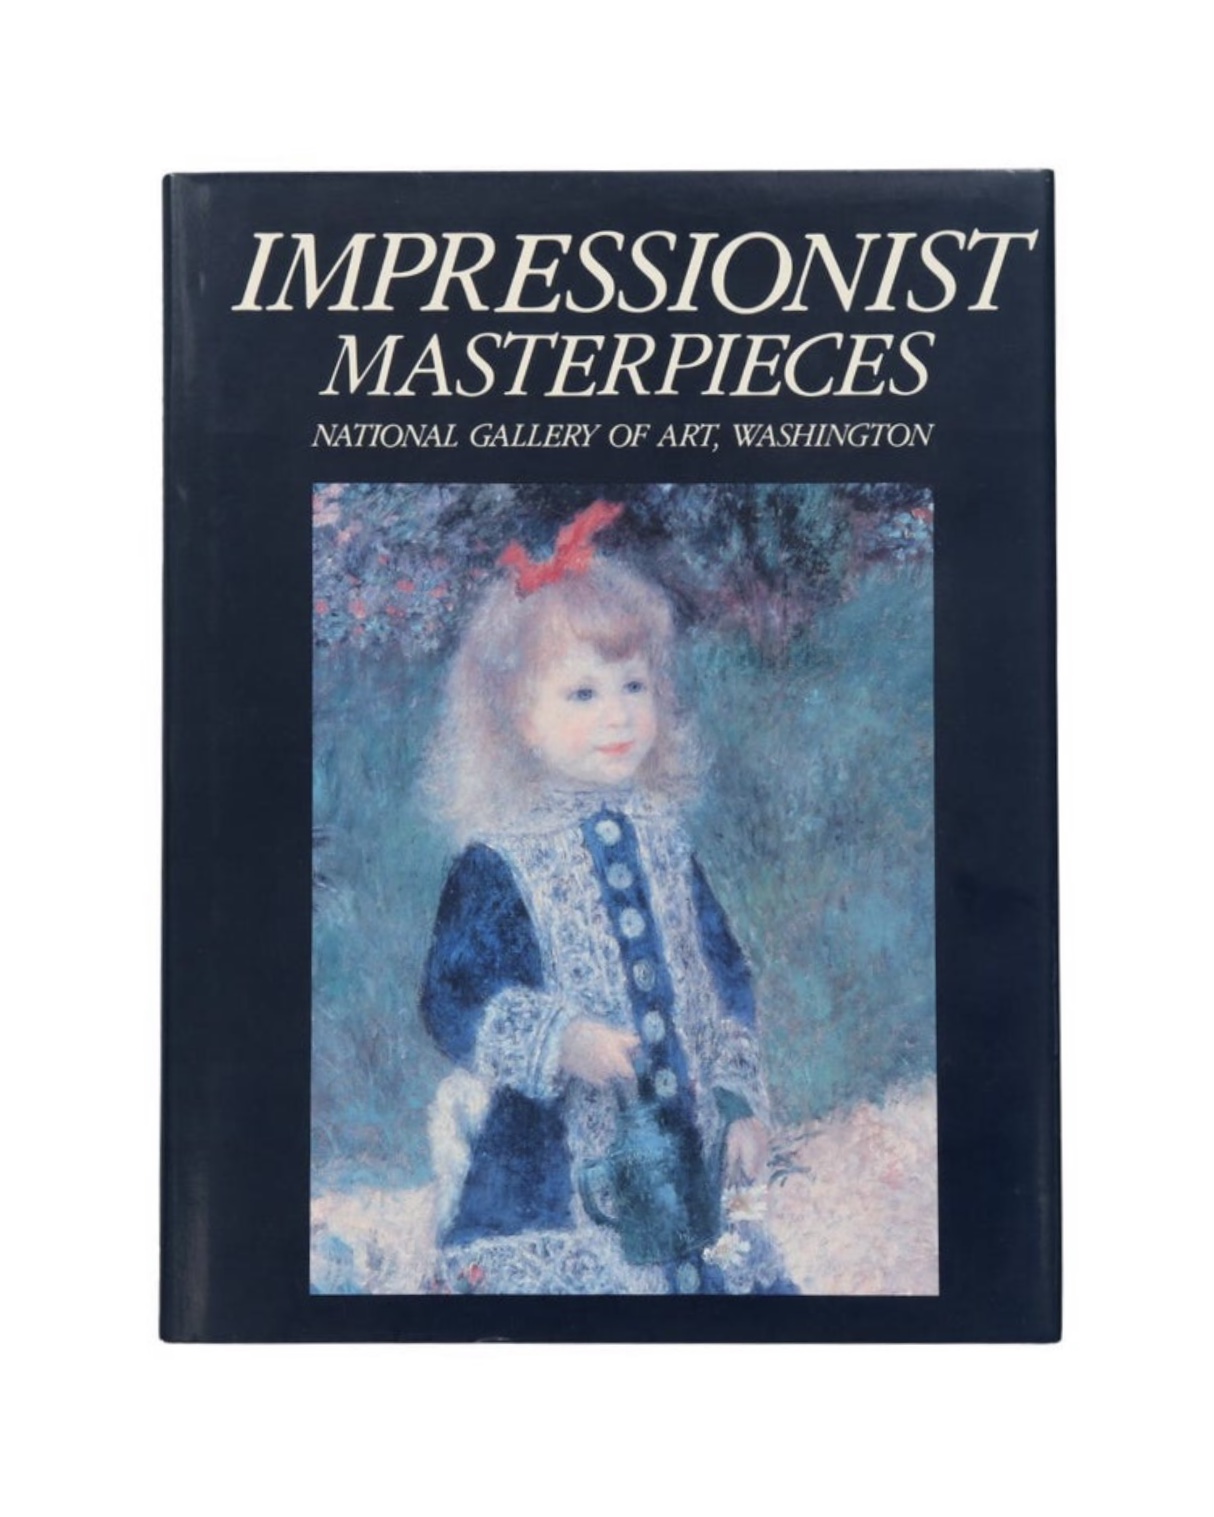 Impressionist Masterpieces by John House~P77665029